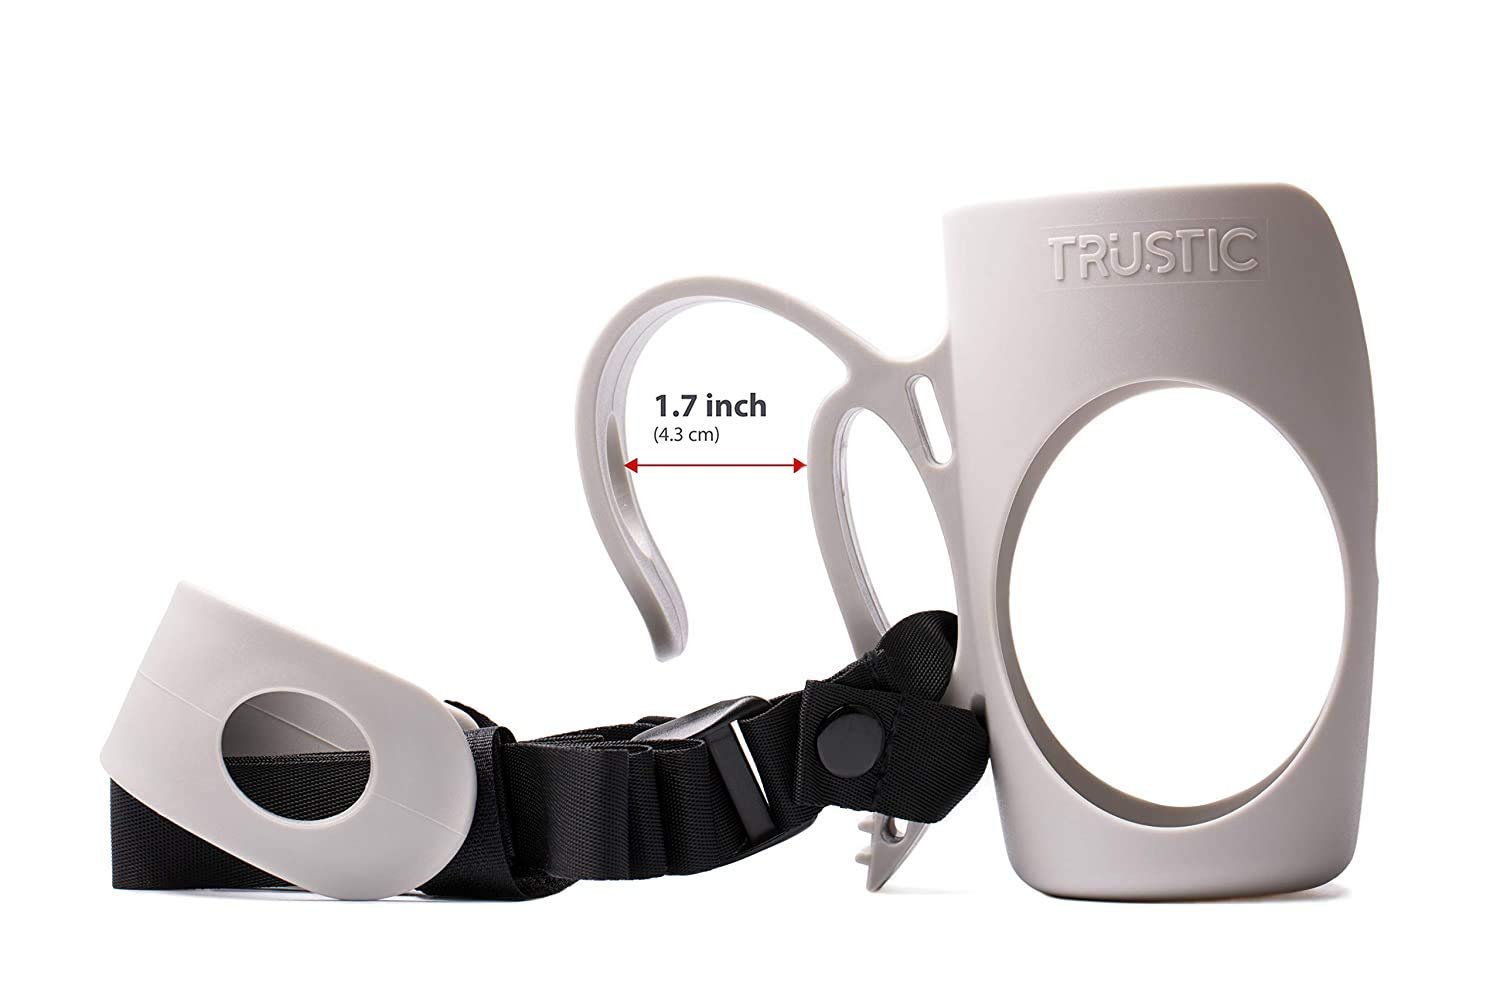 Trustic Child Cup Holder for Car Seats - Gray, Fits Most Models, Size 1 Pack of 1, Free Shipping & Returns